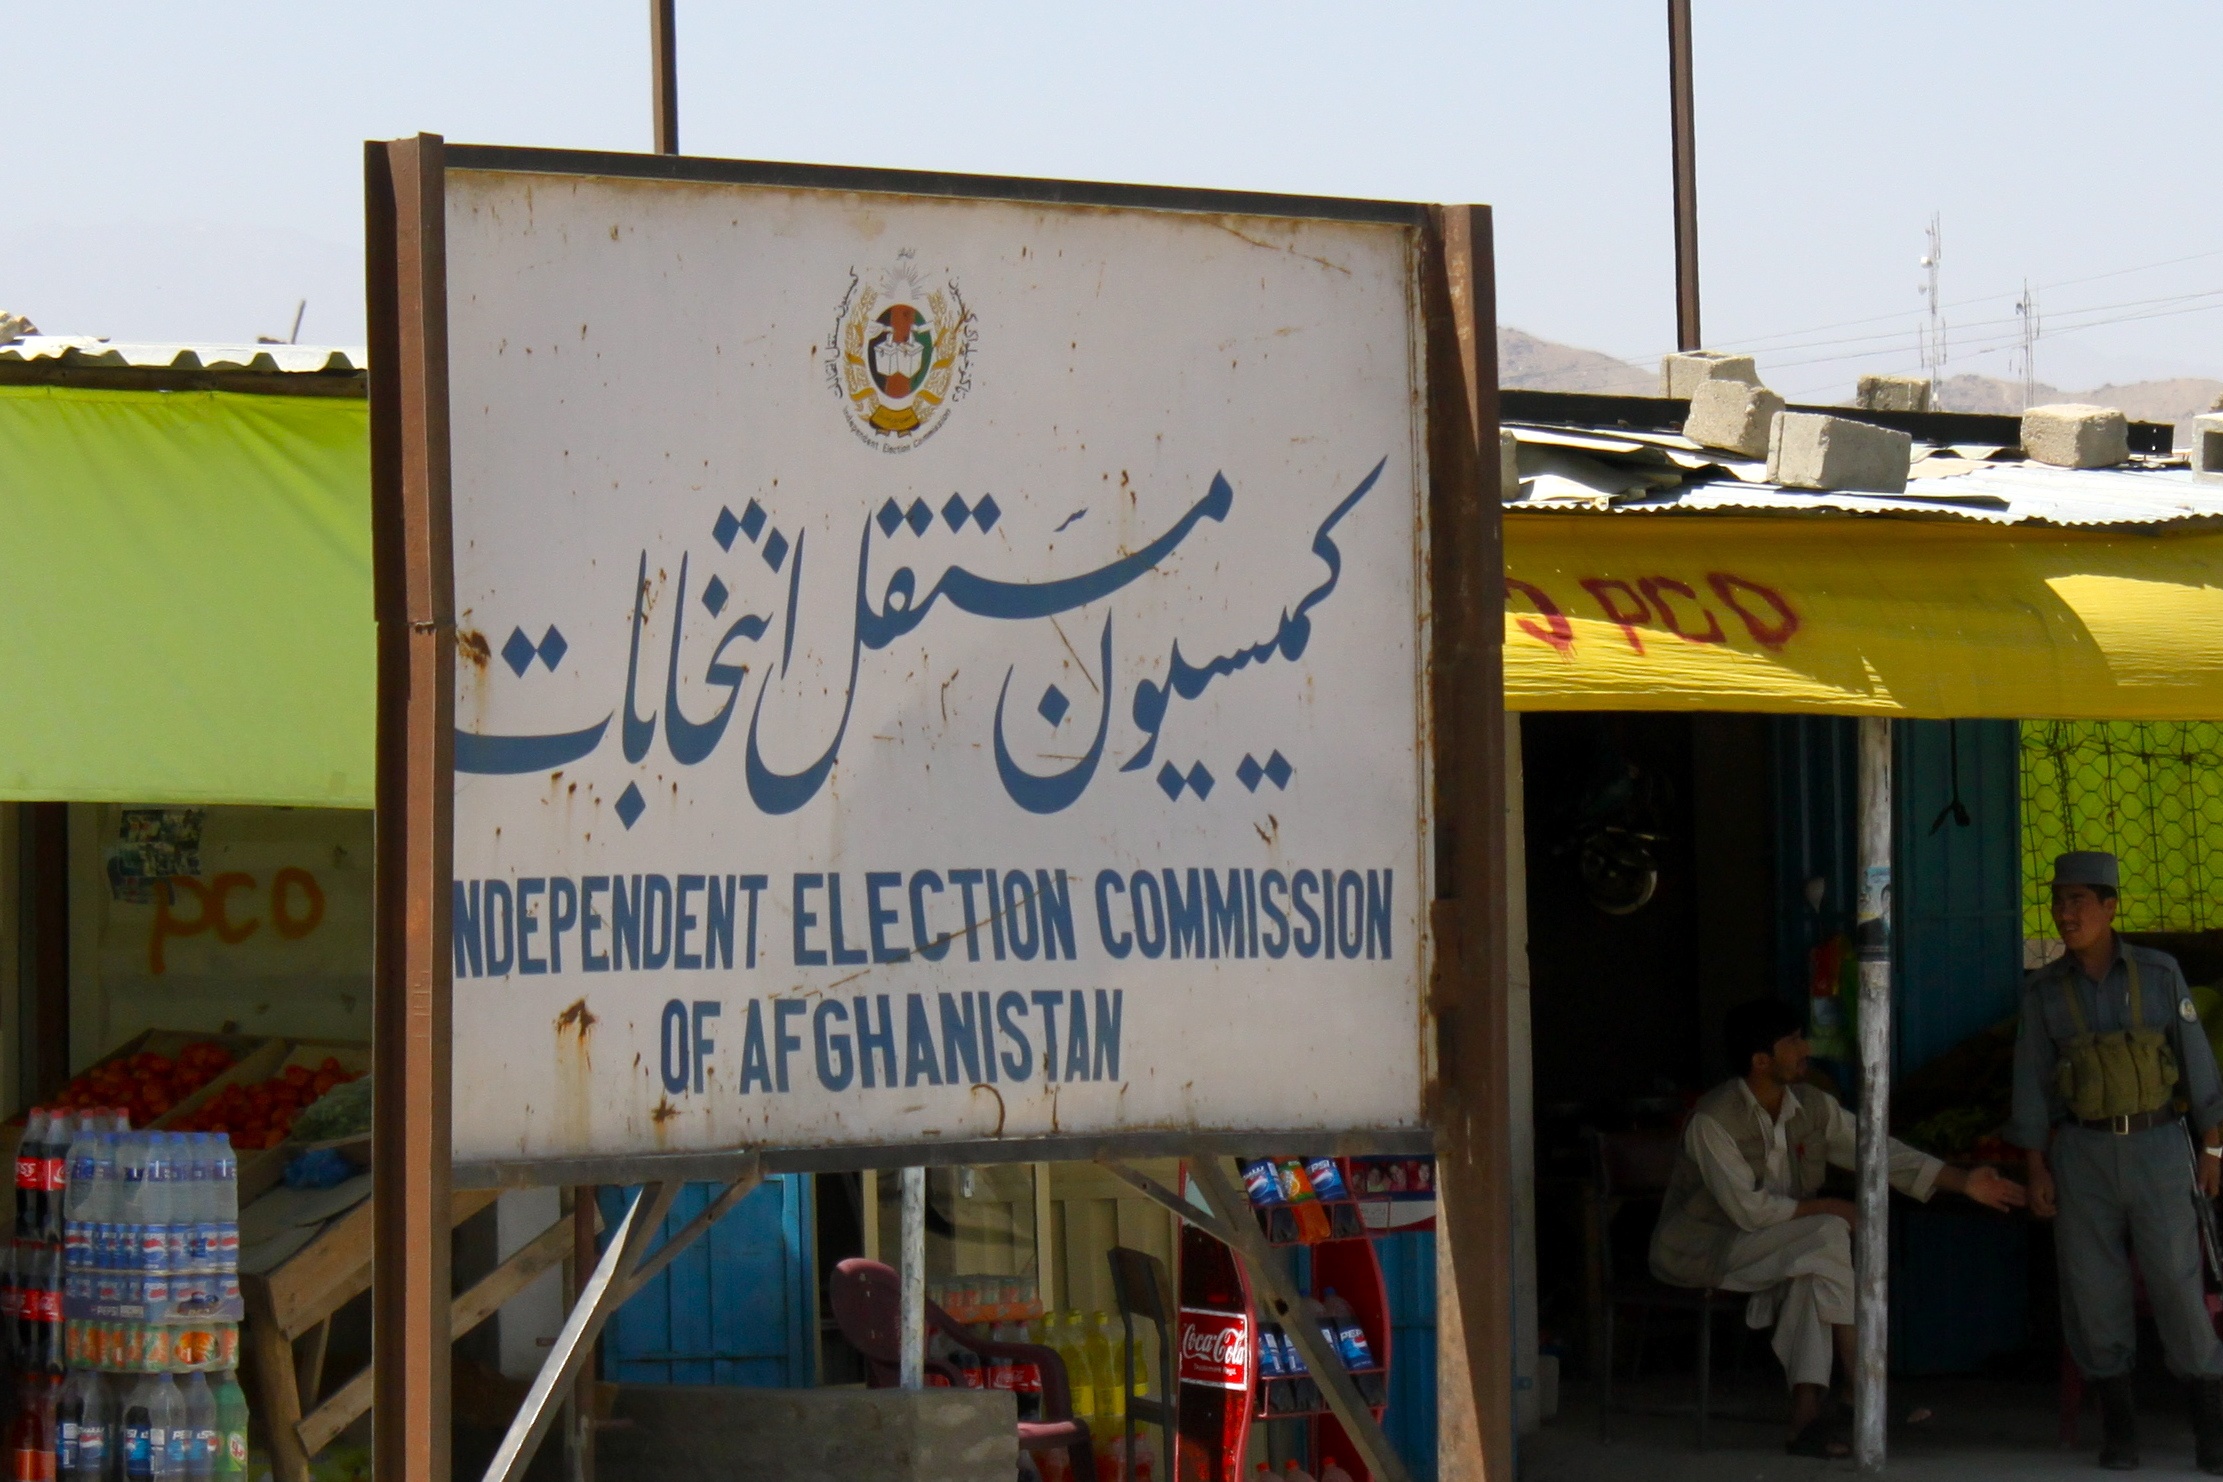 The Independent Election Commission is embroiled in a scandal following the 2014 Afghan vote. (Wiki image)